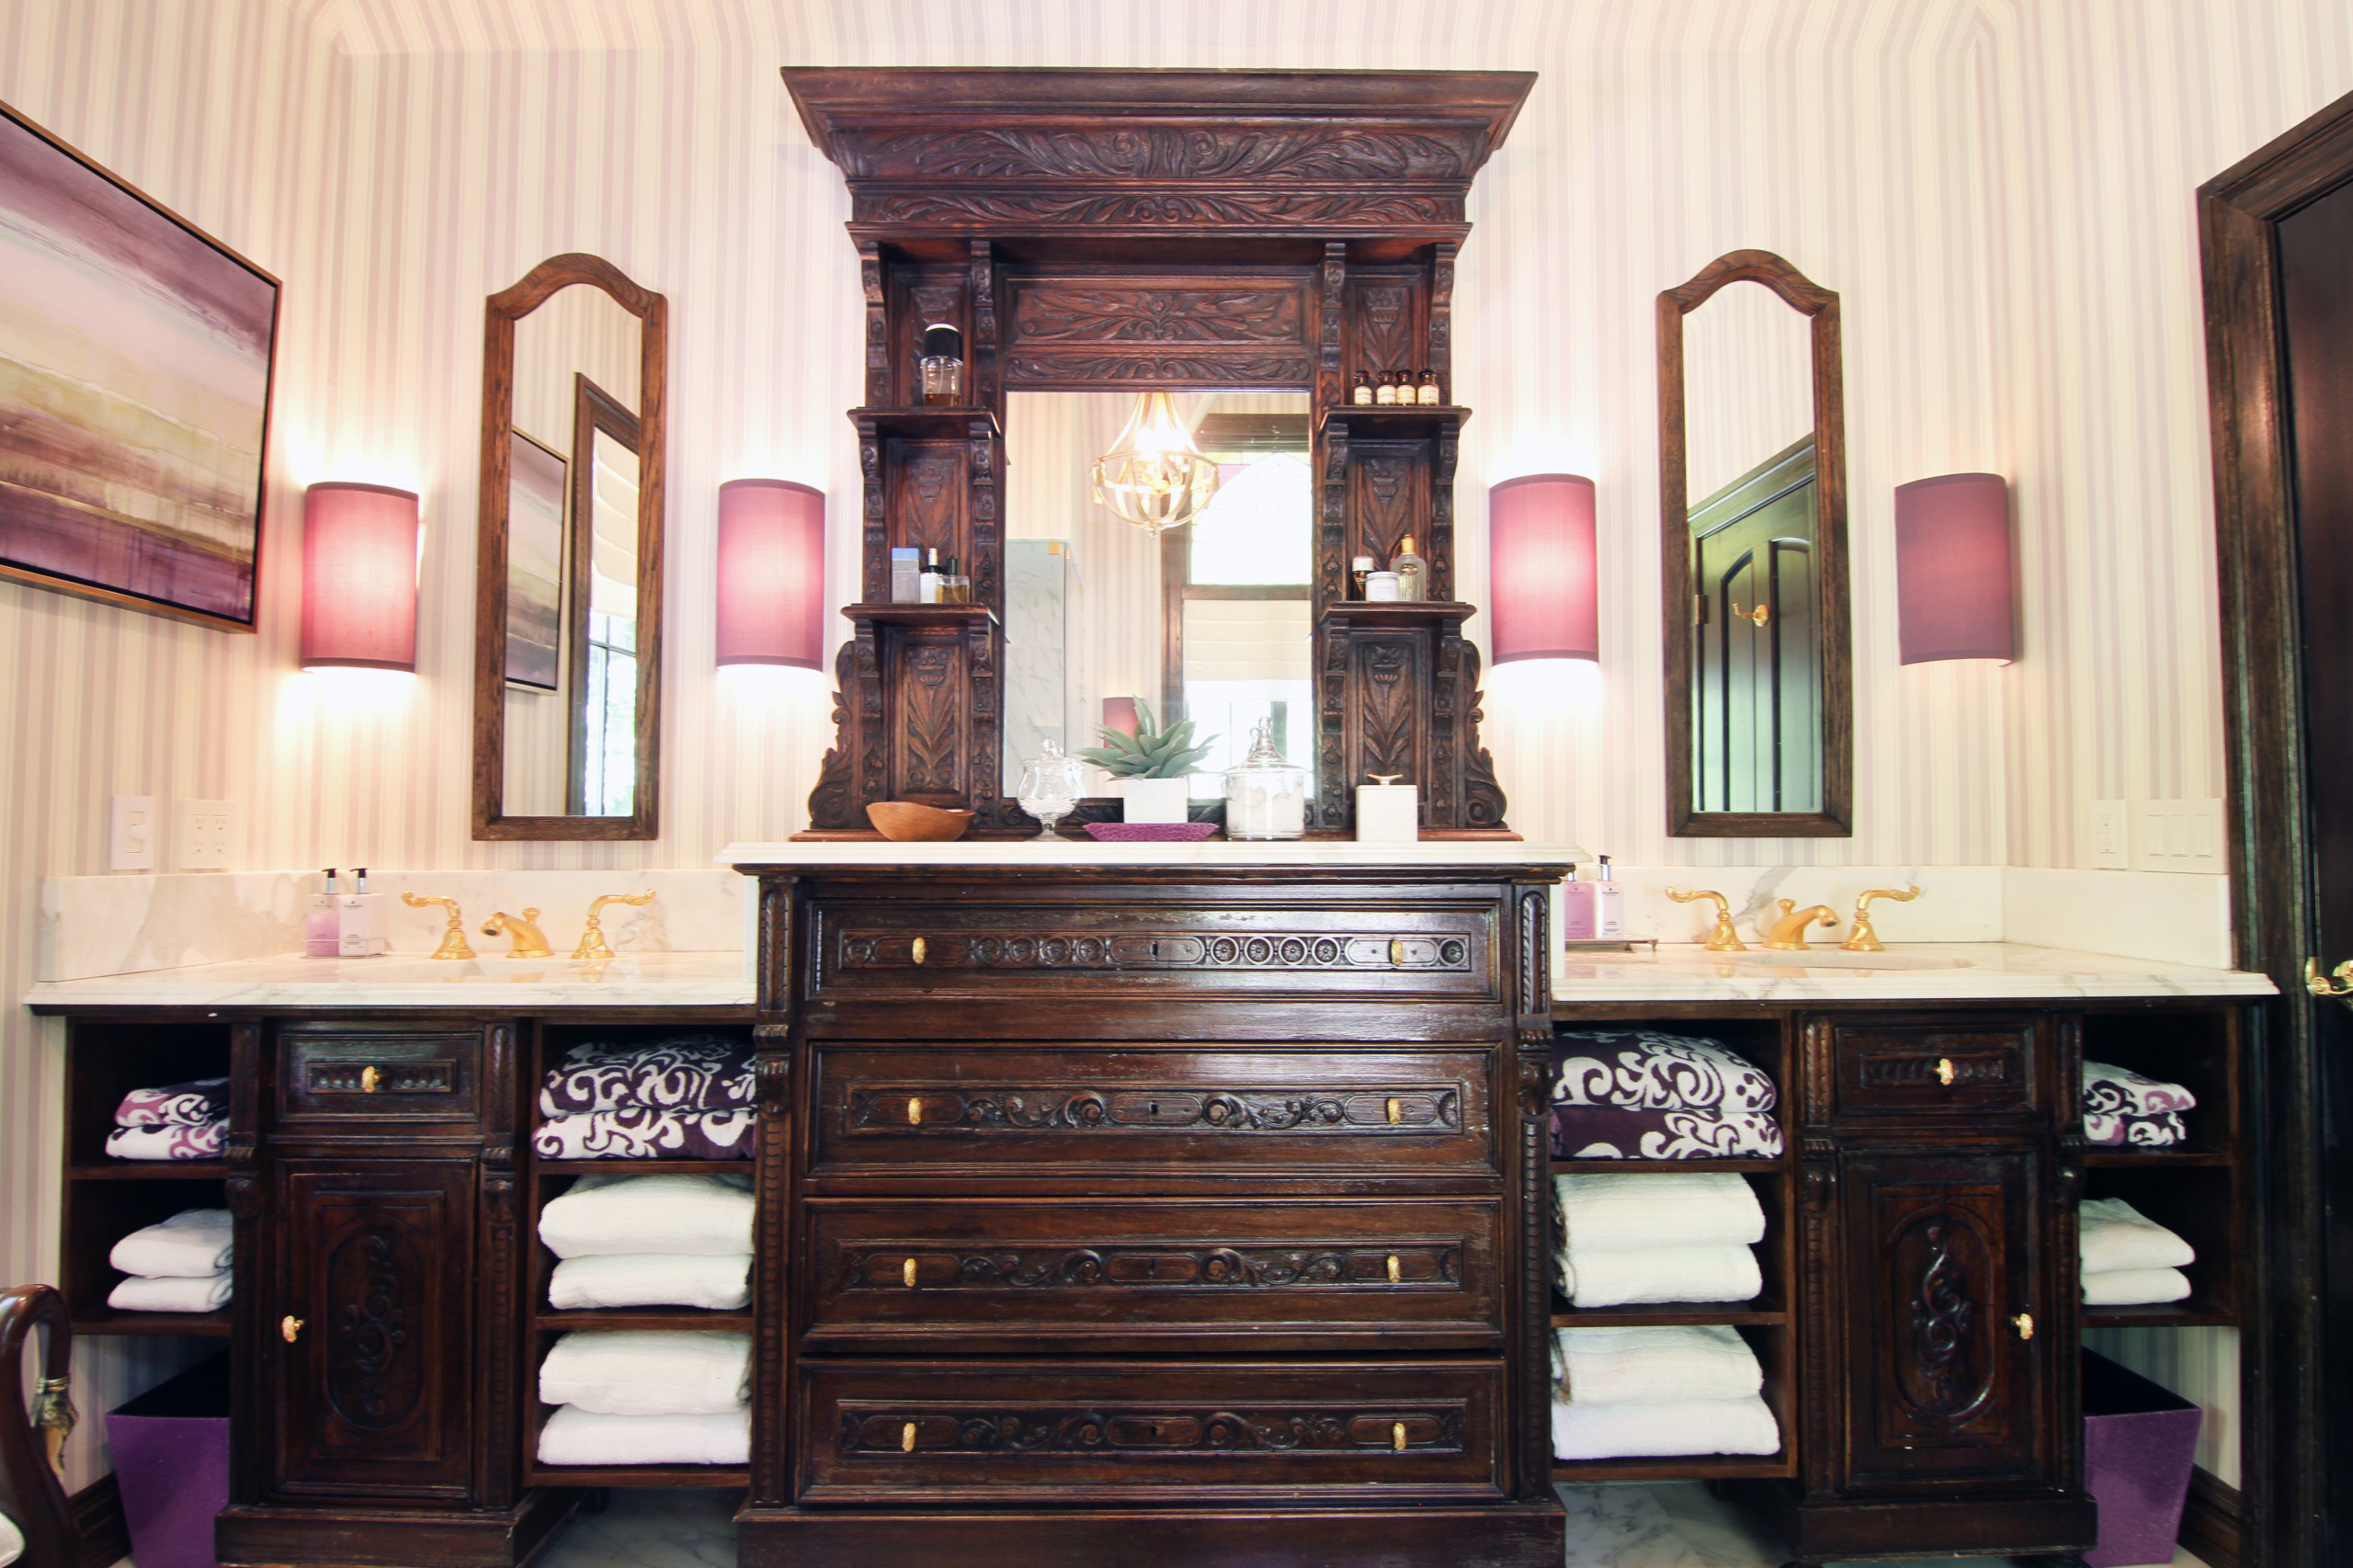 Architectural Salvage in Bathrooms